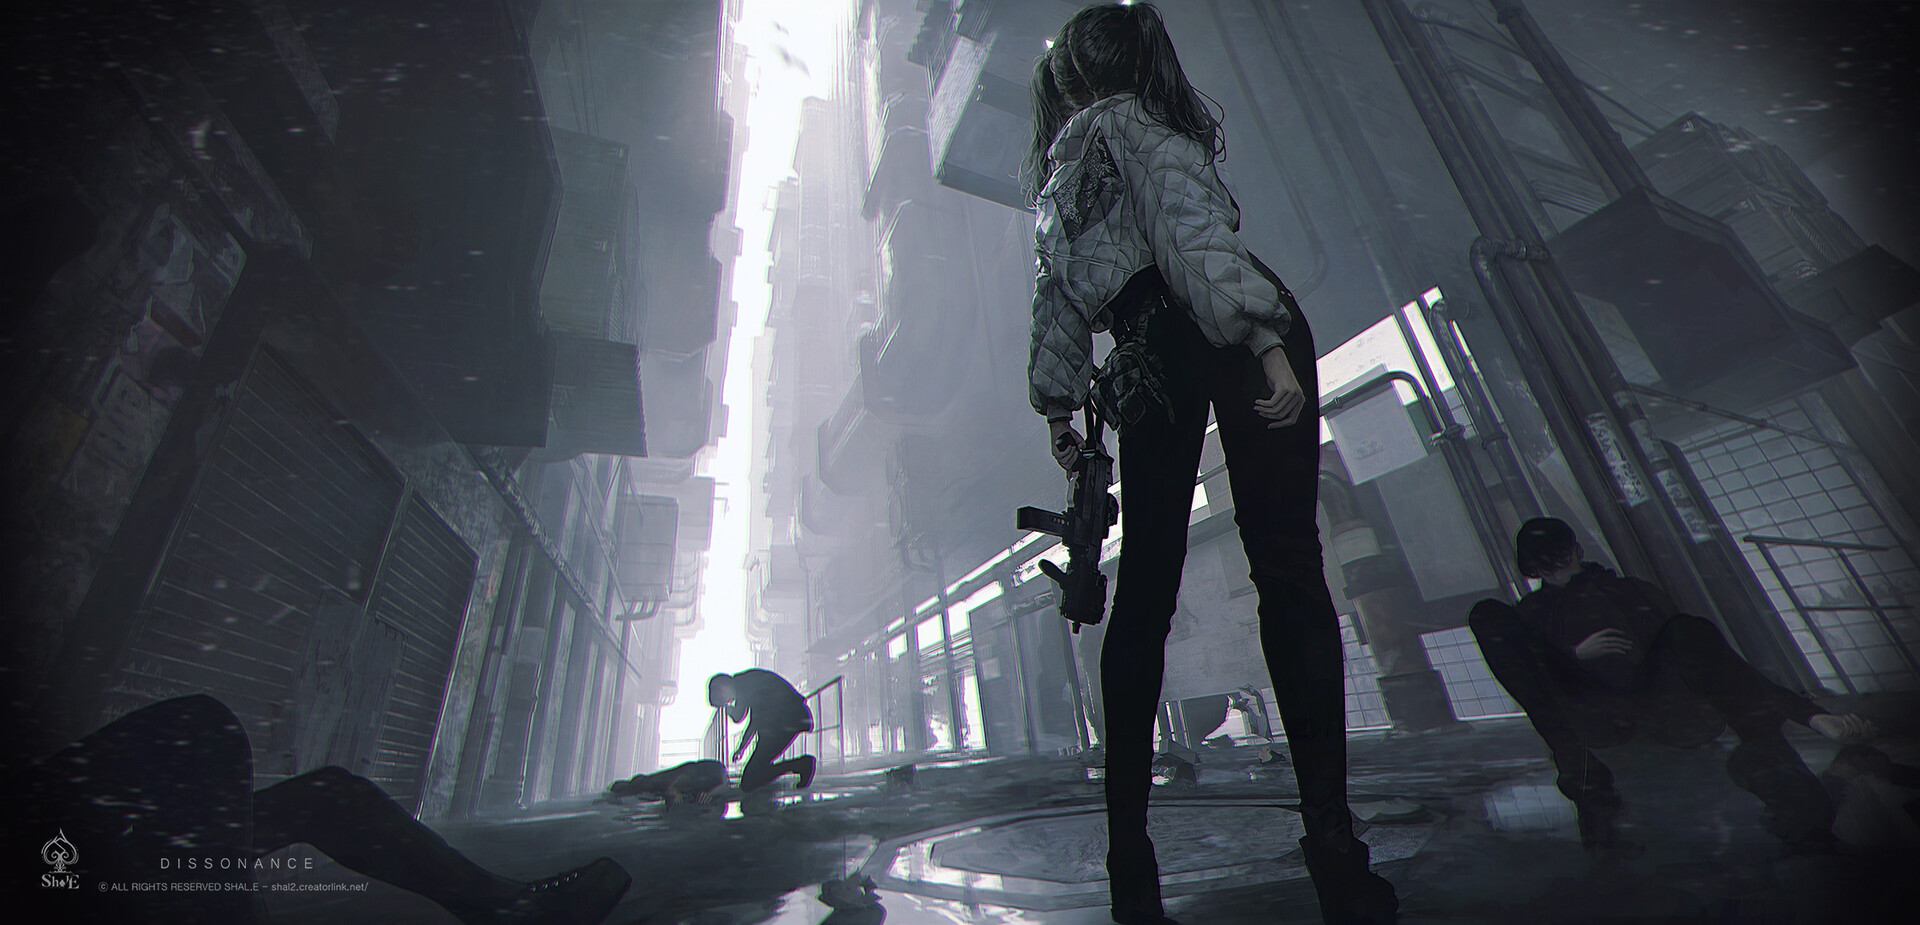 Shal E Drawing Women Pigtails Alleyway Weapon Submachine Gun Low Angle Jacket 1920x925